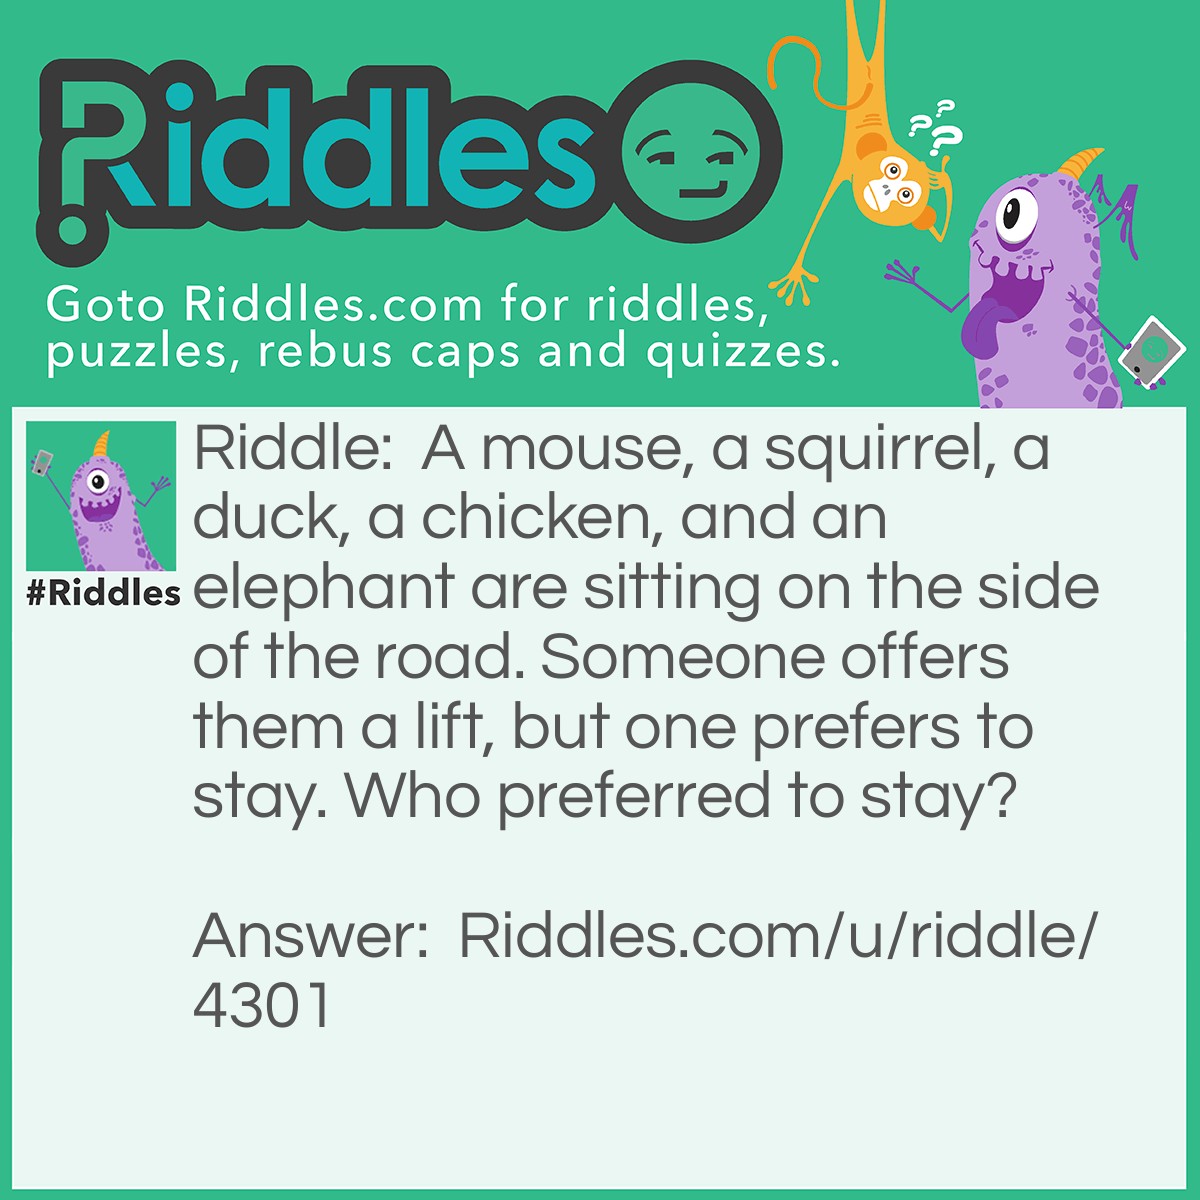 Riddle: A mouse, a squirrel, a duck, a chicken, and an elephant are sitting on the side of the road. Someone offers them a lift, but one prefers to stay. Who preferred to stay? Answer: The Elephant Stayed. If you didn't know, elephants are scared of mice.